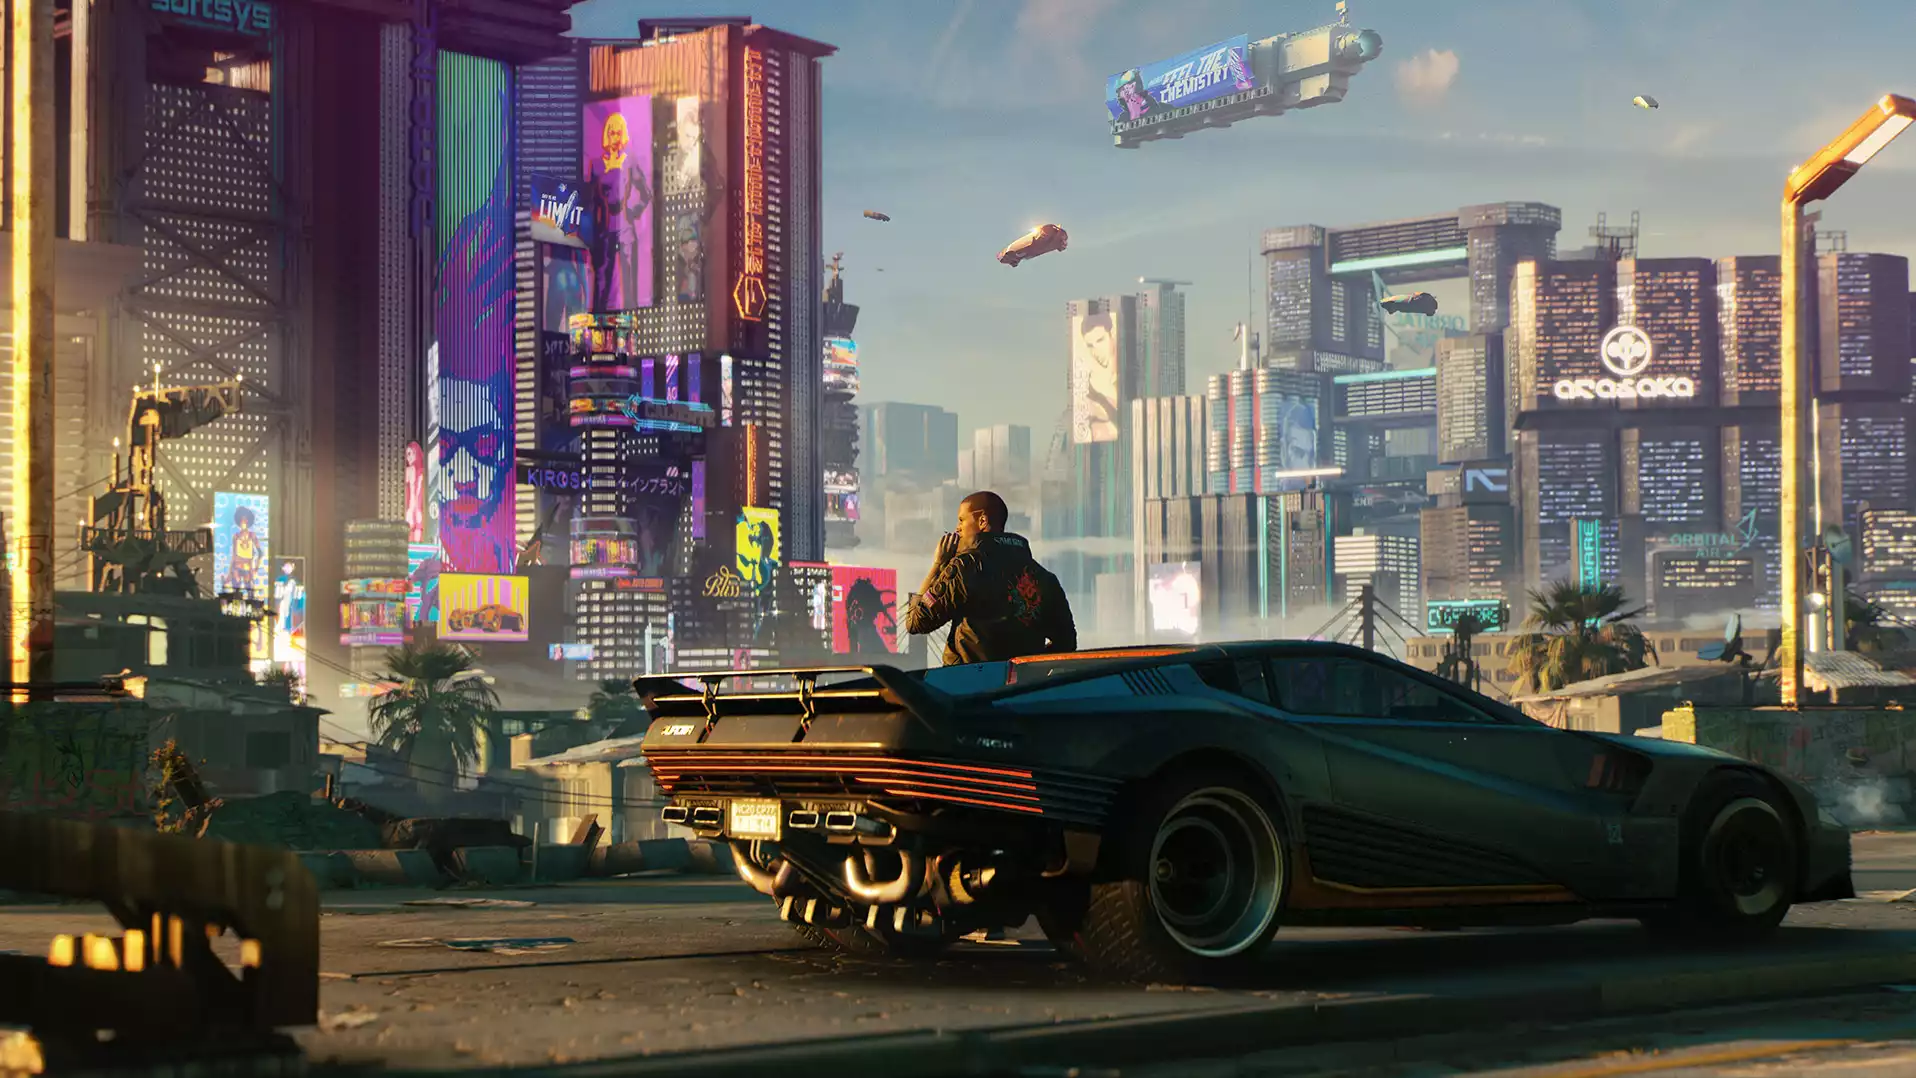 Cyberpunk 2077 sequel teases a surprising new location for Project Orion